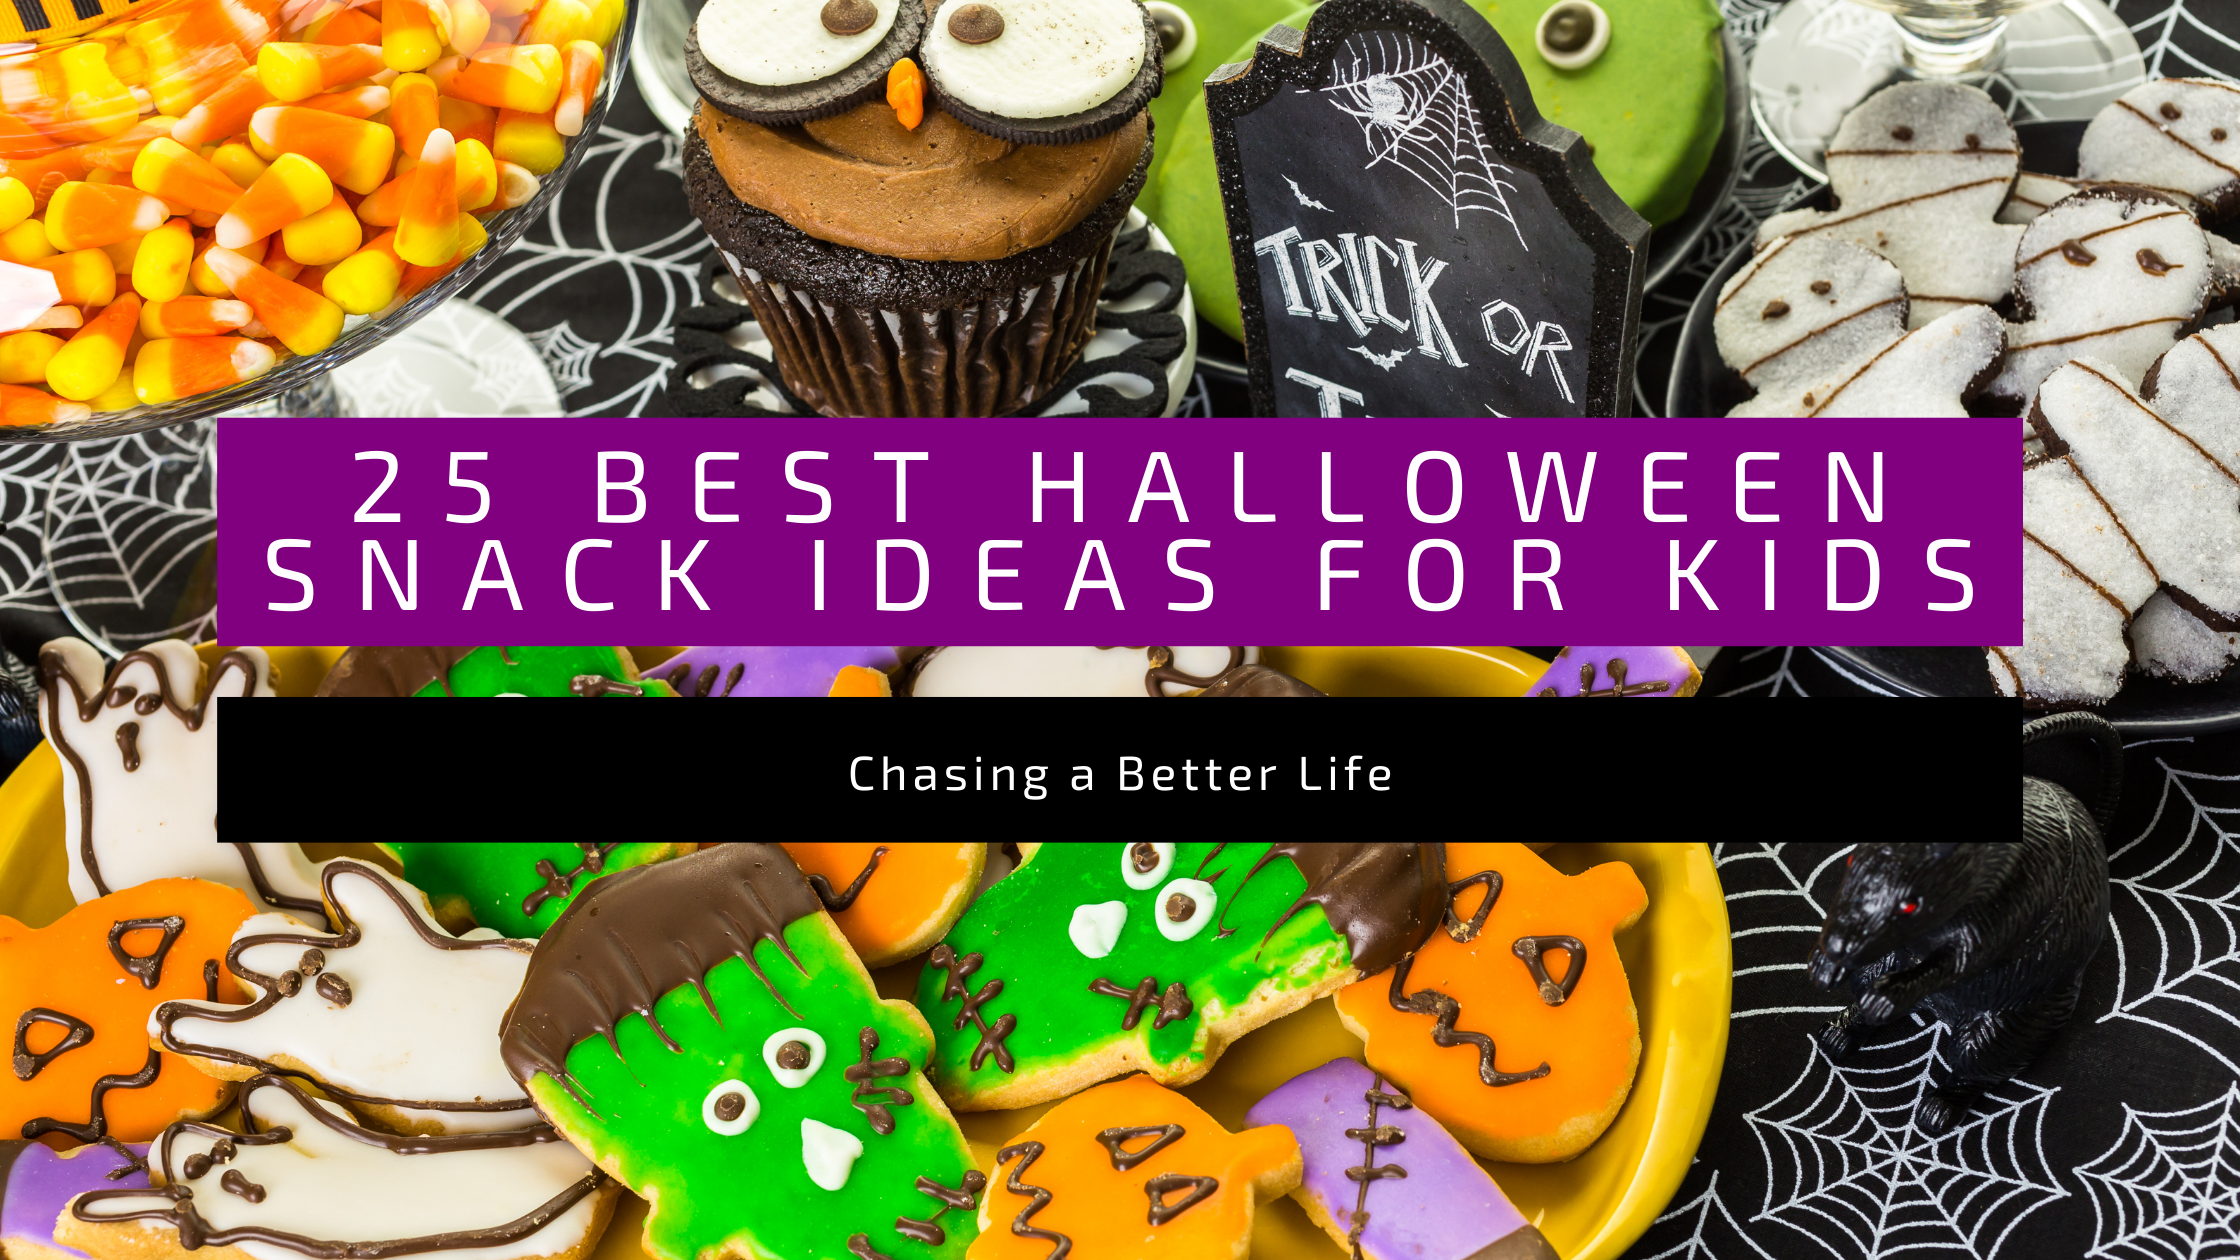 The 25 Best Halloween Snack Ideas for Kids 32